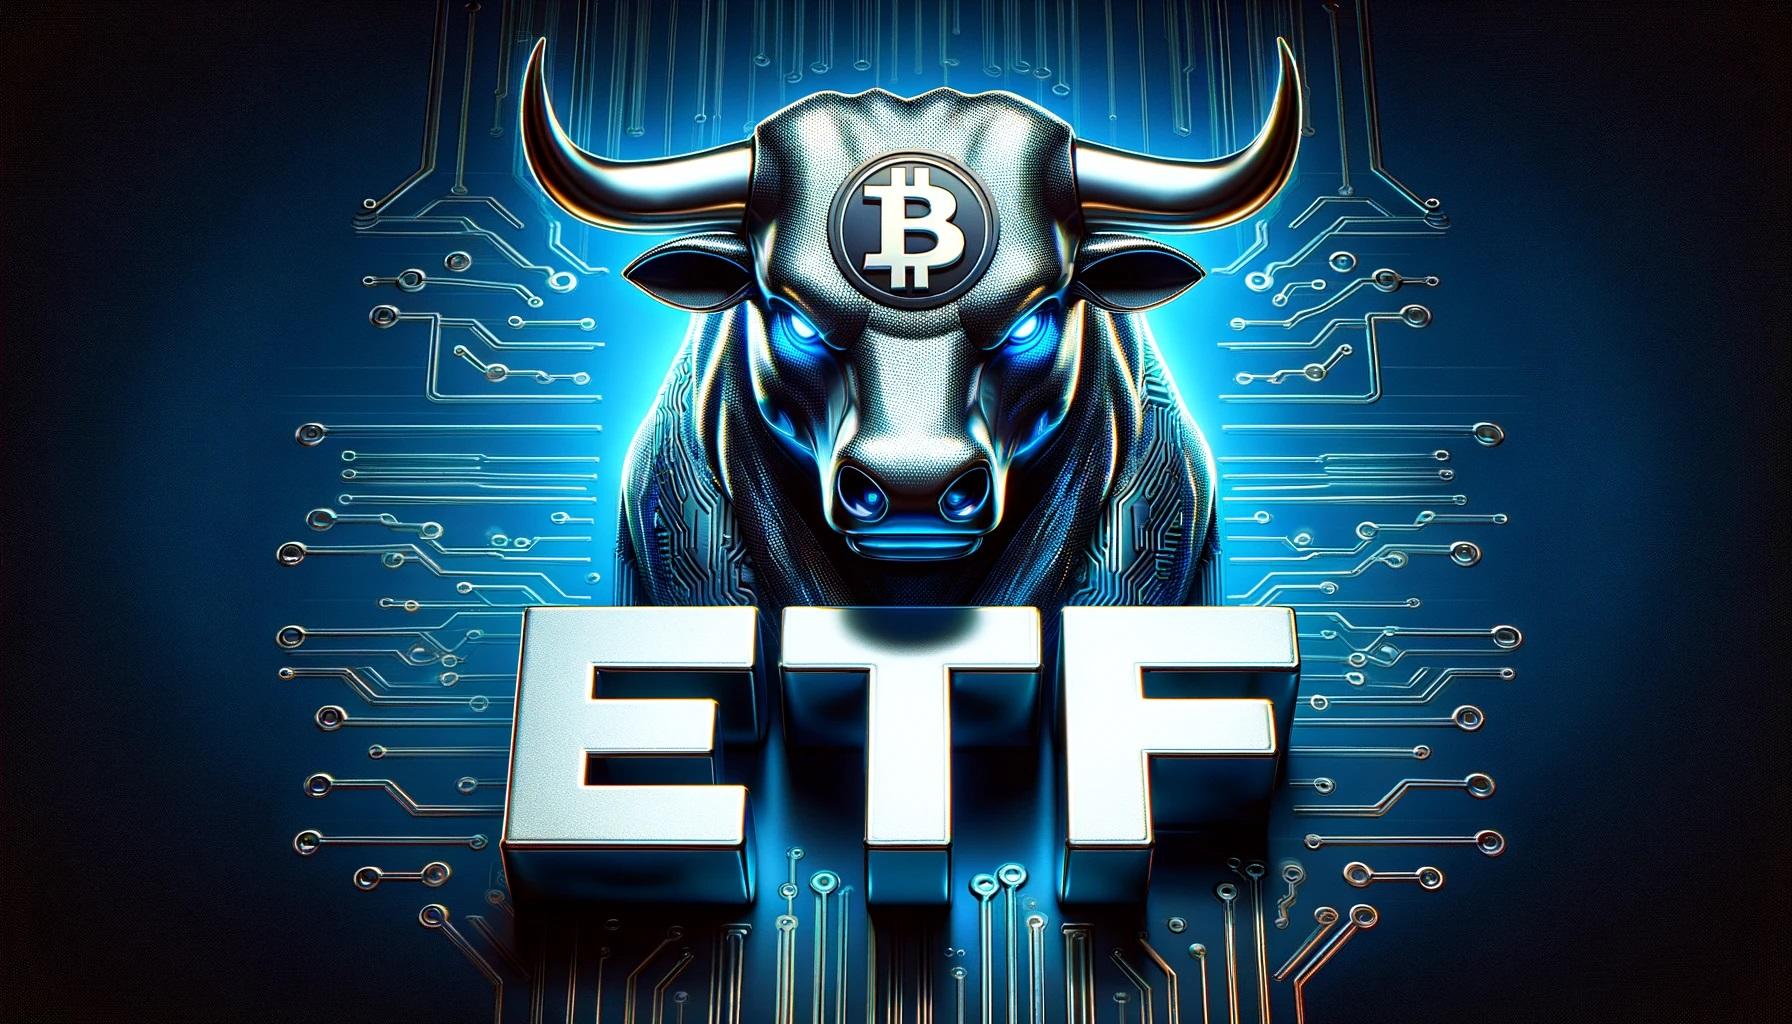 Bitcoin ETF Surge: BTC Price Poised to Reach $112,000 This Year, According to CryptoQuant